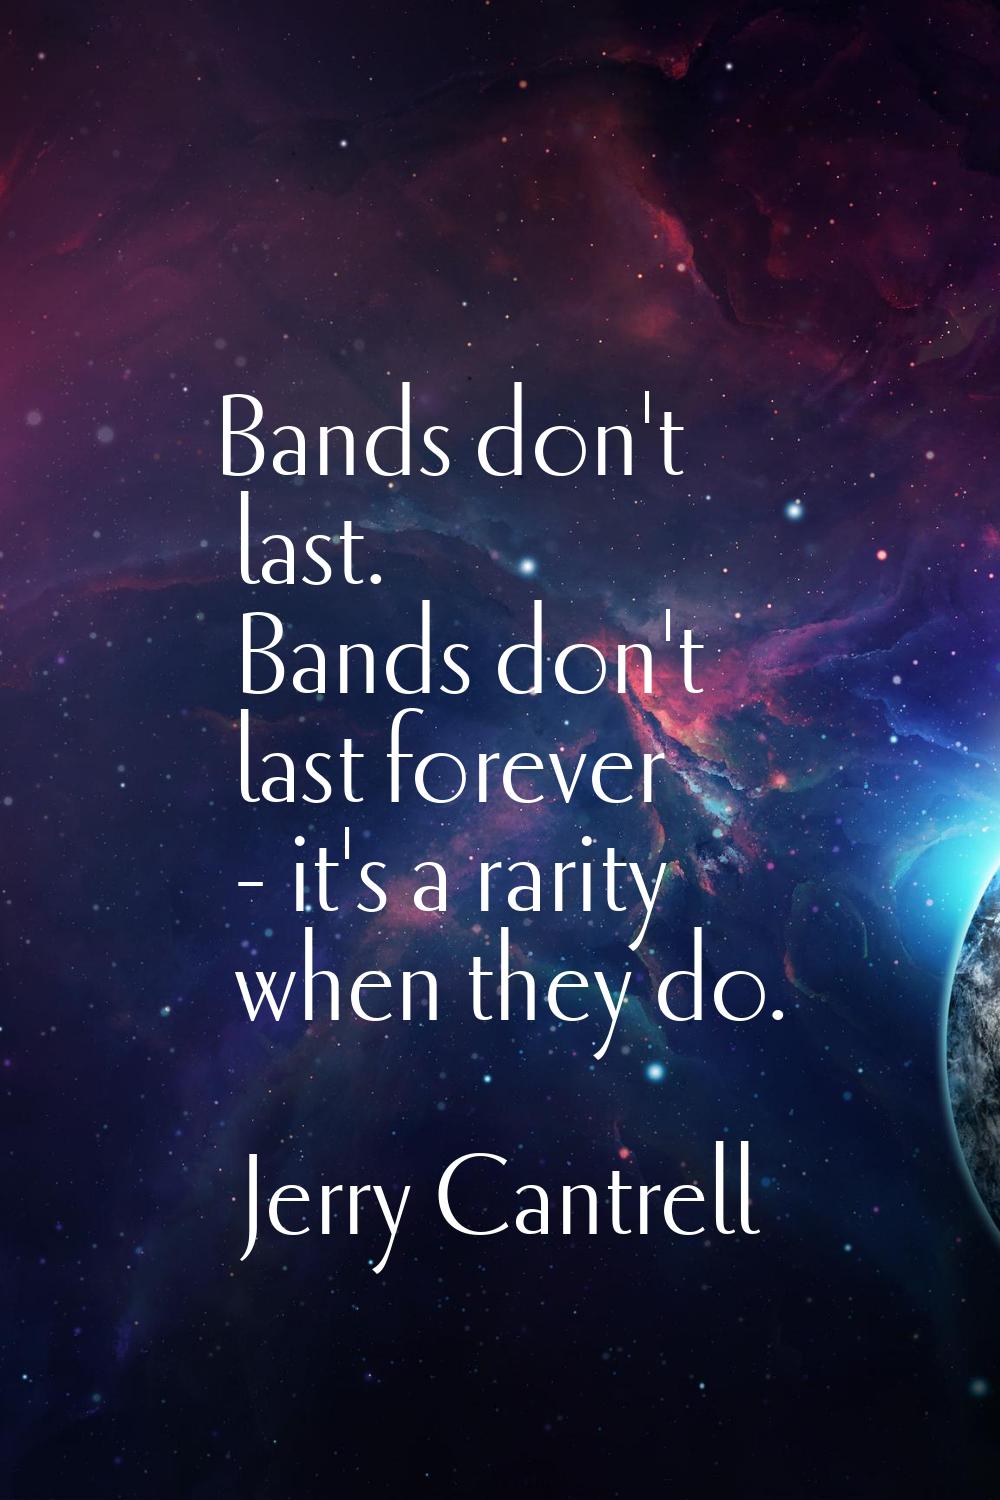 Bands don't last. Bands don't last forever - it's a rarity when they do.